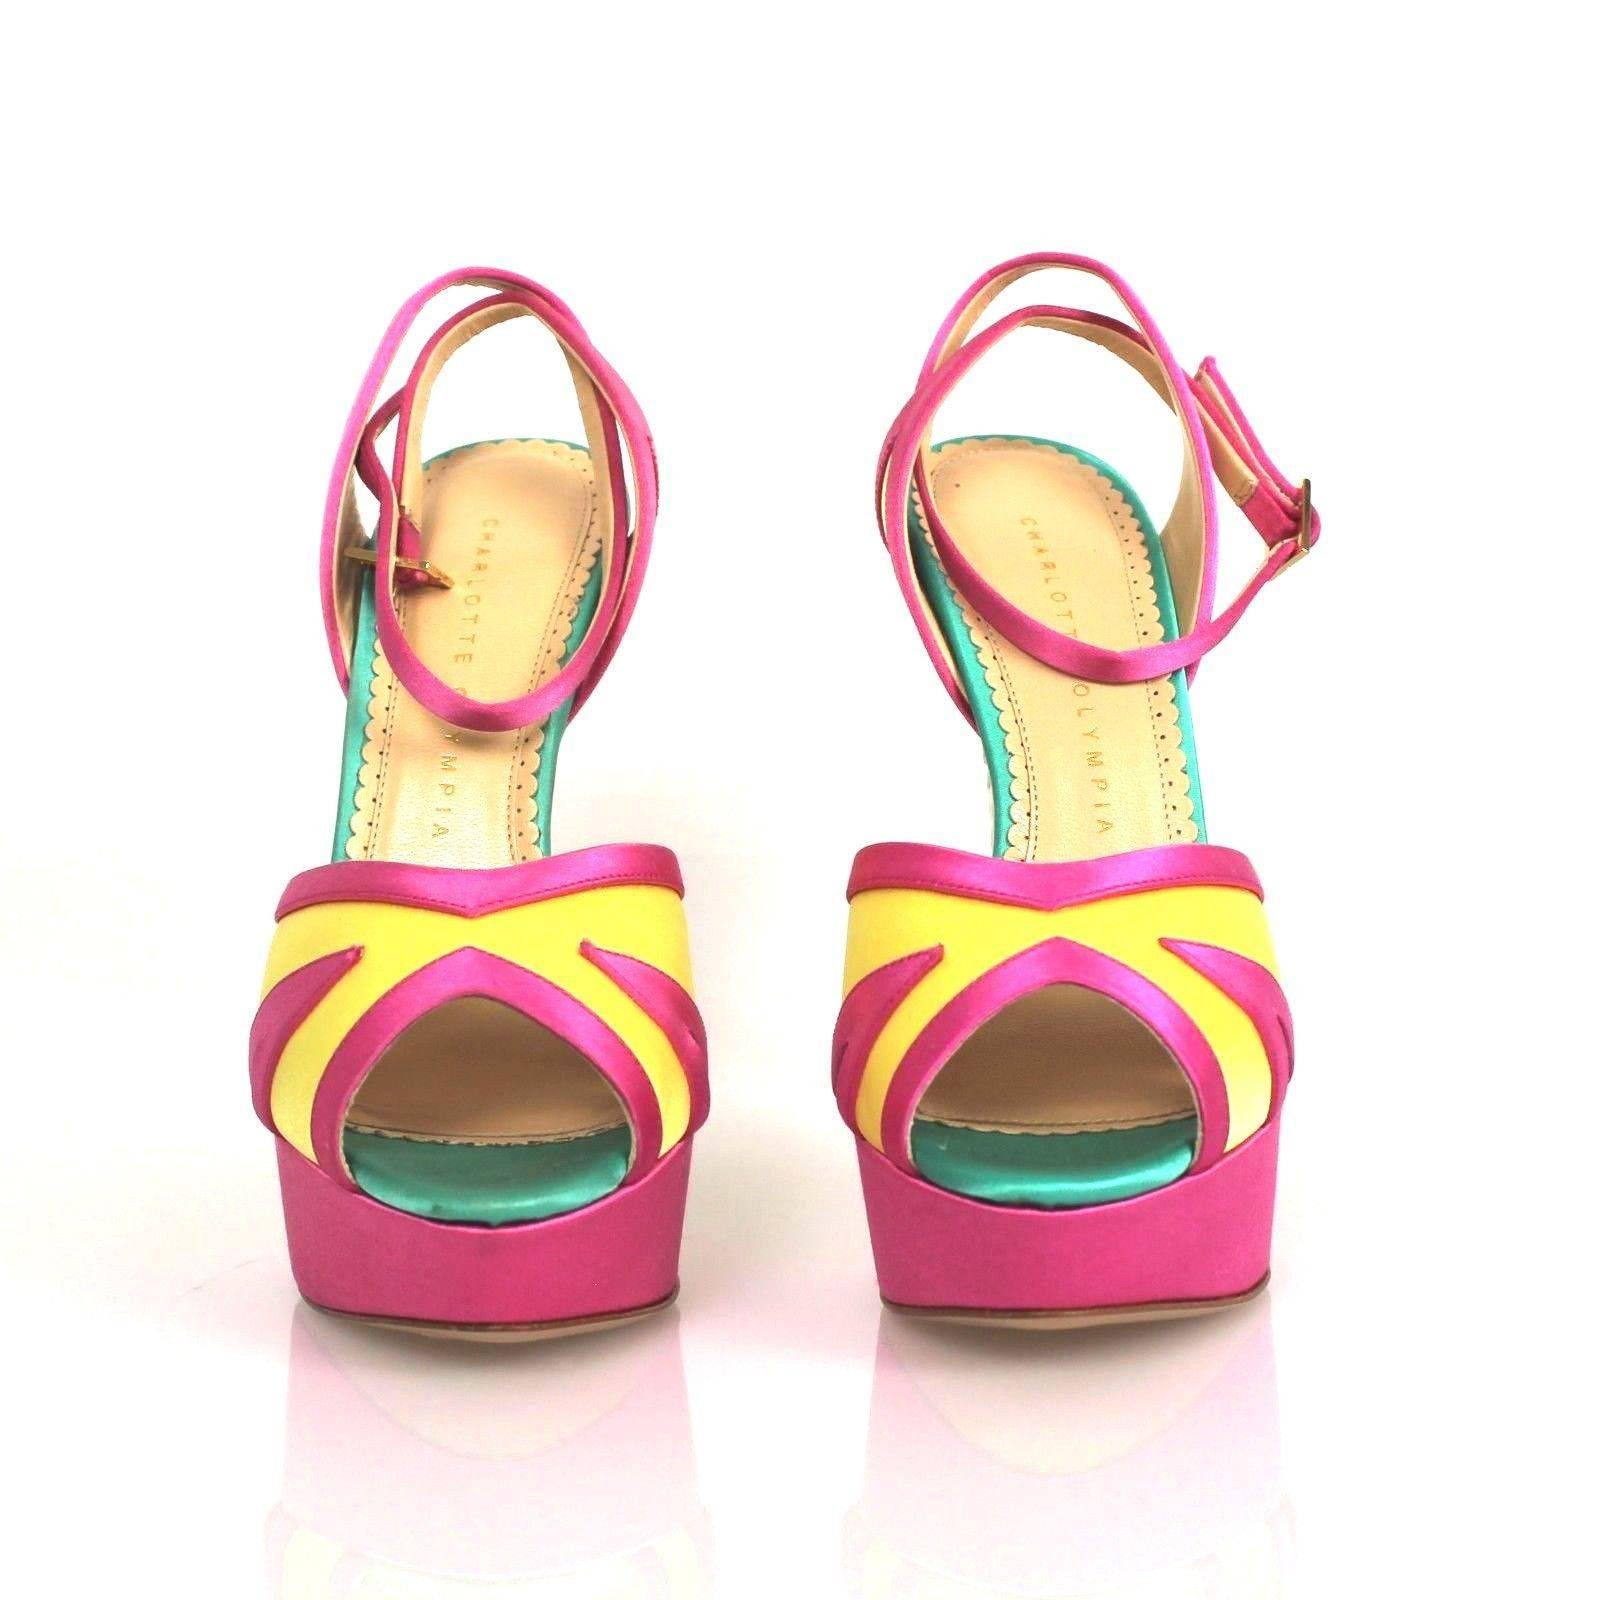 Multicoloured leather 'Apache Eagle' sandals from Charlotte Olympia featuring an open toe, crossover straps to the front, a brand embossed insole, an ankle strap with a side buckle fastening, a high stiletto heel and a platform sole.

Conditions: